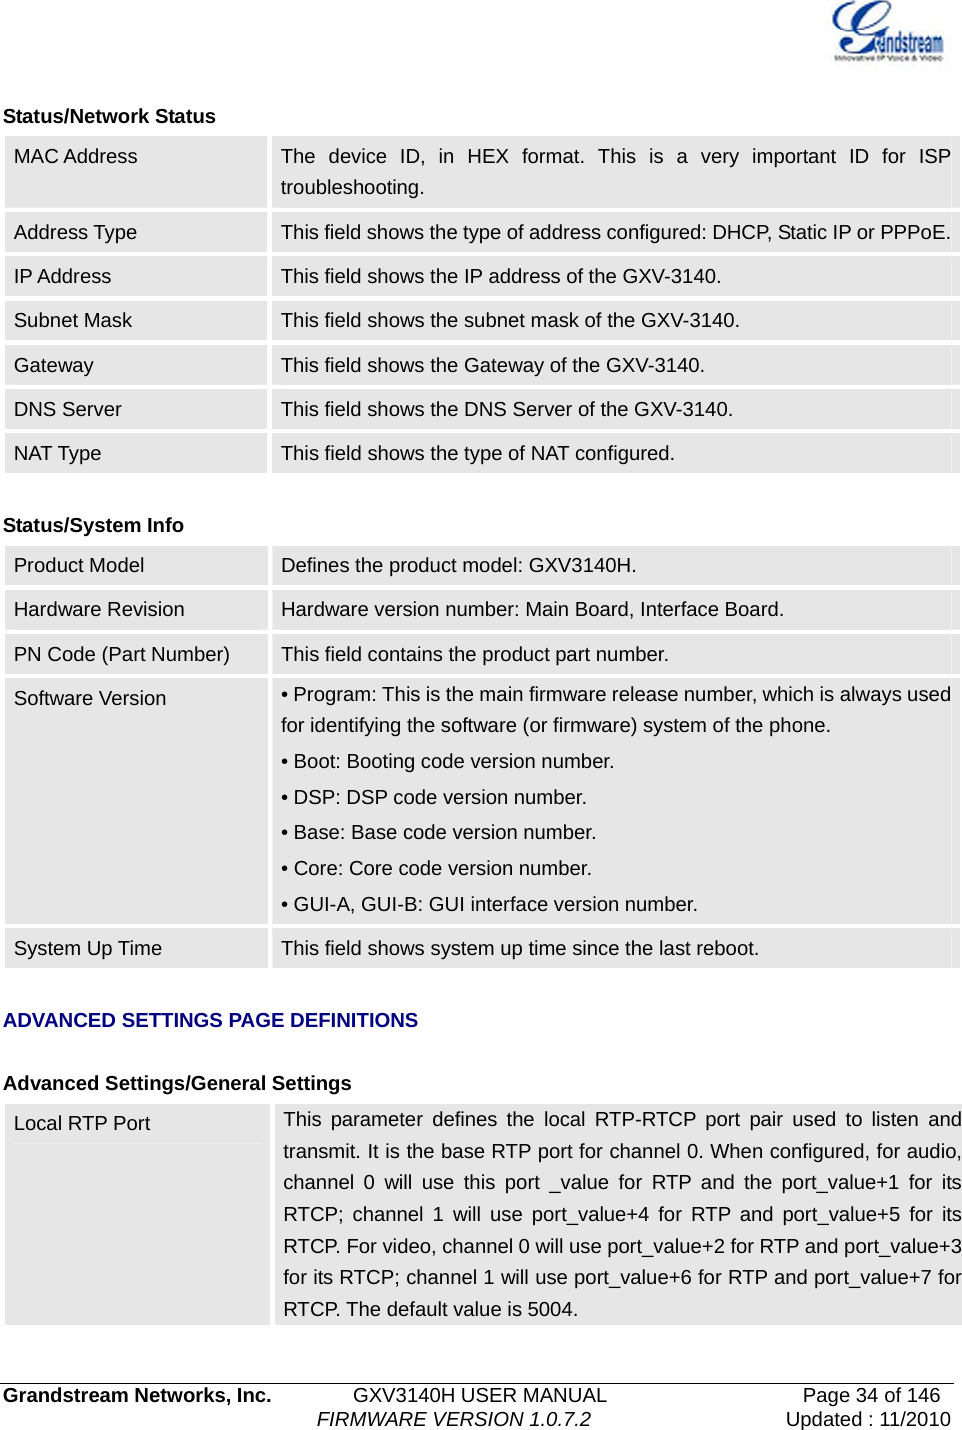   Grandstream Networks, Inc.        GXV3140H USER MANUAL                  Page 34 of 146                                FIRMWARE VERSION 1.0.7.2 Updated : 11/2010   Status/Network Status MAC Address  The device ID, in HEX format. This is a very important ID for ISP troubleshooting. Address Type  This field shows the type of address configured: DHCP, Static IP or PPPoE.IP Address  This field shows the IP address of the GXV-3140. Subnet Mask  This field shows the subnet mask of the GXV-3140. Gateway  This field shows the Gateway of the GXV-3140. DNS Server  This field shows the DNS Server of the GXV-3140. NAT Type  This field shows the type of NAT configured.  Status/System Info Product Model  Defines the product model: GXV3140H. Hardware Revision    Hardware version number: Main Board, Interface Board. PN Code (Part Number)  This field contains the product part number. Software Version  • Program: This is the main firmware release number, which is always used for identifying the software (or firmware) system of the phone. • Boot: Booting code version number. • DSP: DSP code version number. • Base: Base code version number. • Core: Core code version number. • GUI-A, GUI-B: GUI interface version number. System Up Time  This field shows system up time since the last reboot.  ADVANCED SETTINGS PAGE DEFINITIONS  Advanced Settings/General Settings Local RTP Port  This parameter defines the local RTP-RTCP port pair used to listen and transmit. It is the base RTP port for channel 0. When configured, for audio, channel 0 will use this port _value for RTP and the port_value+1 for its RTCP; channel 1 will use port_value+4 for RTP and port_value+5 for its RTCP. For video, channel 0 will use port_value+2 for RTP and port_value+3 for its RTCP; channel 1 will use port_value+6 for RTP and port_value+7 for RTCP. The default value is 5004. 